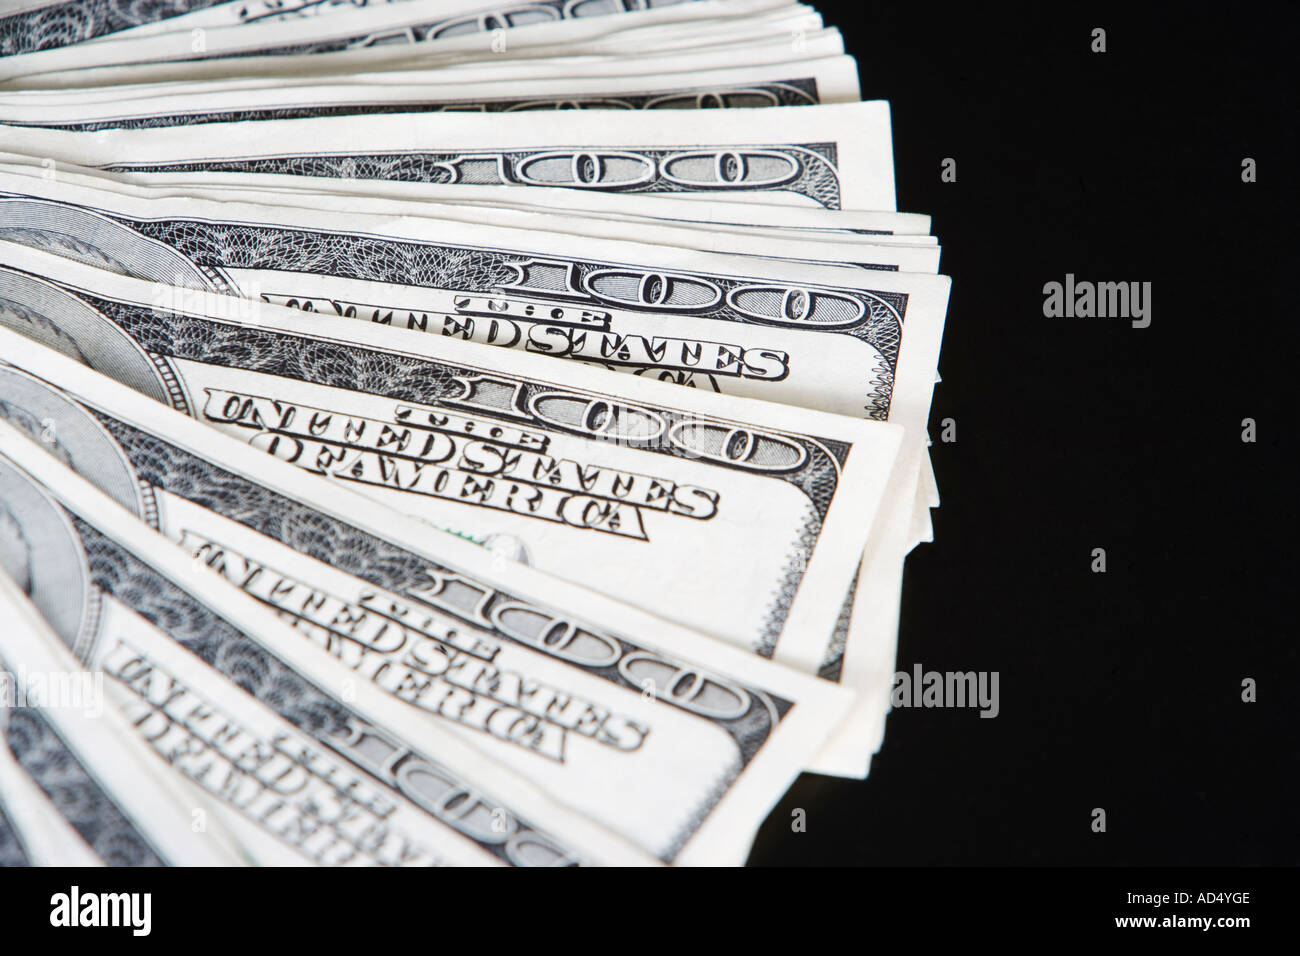 UNITED STATES CURRENCY, DOLLARS Stock Photo